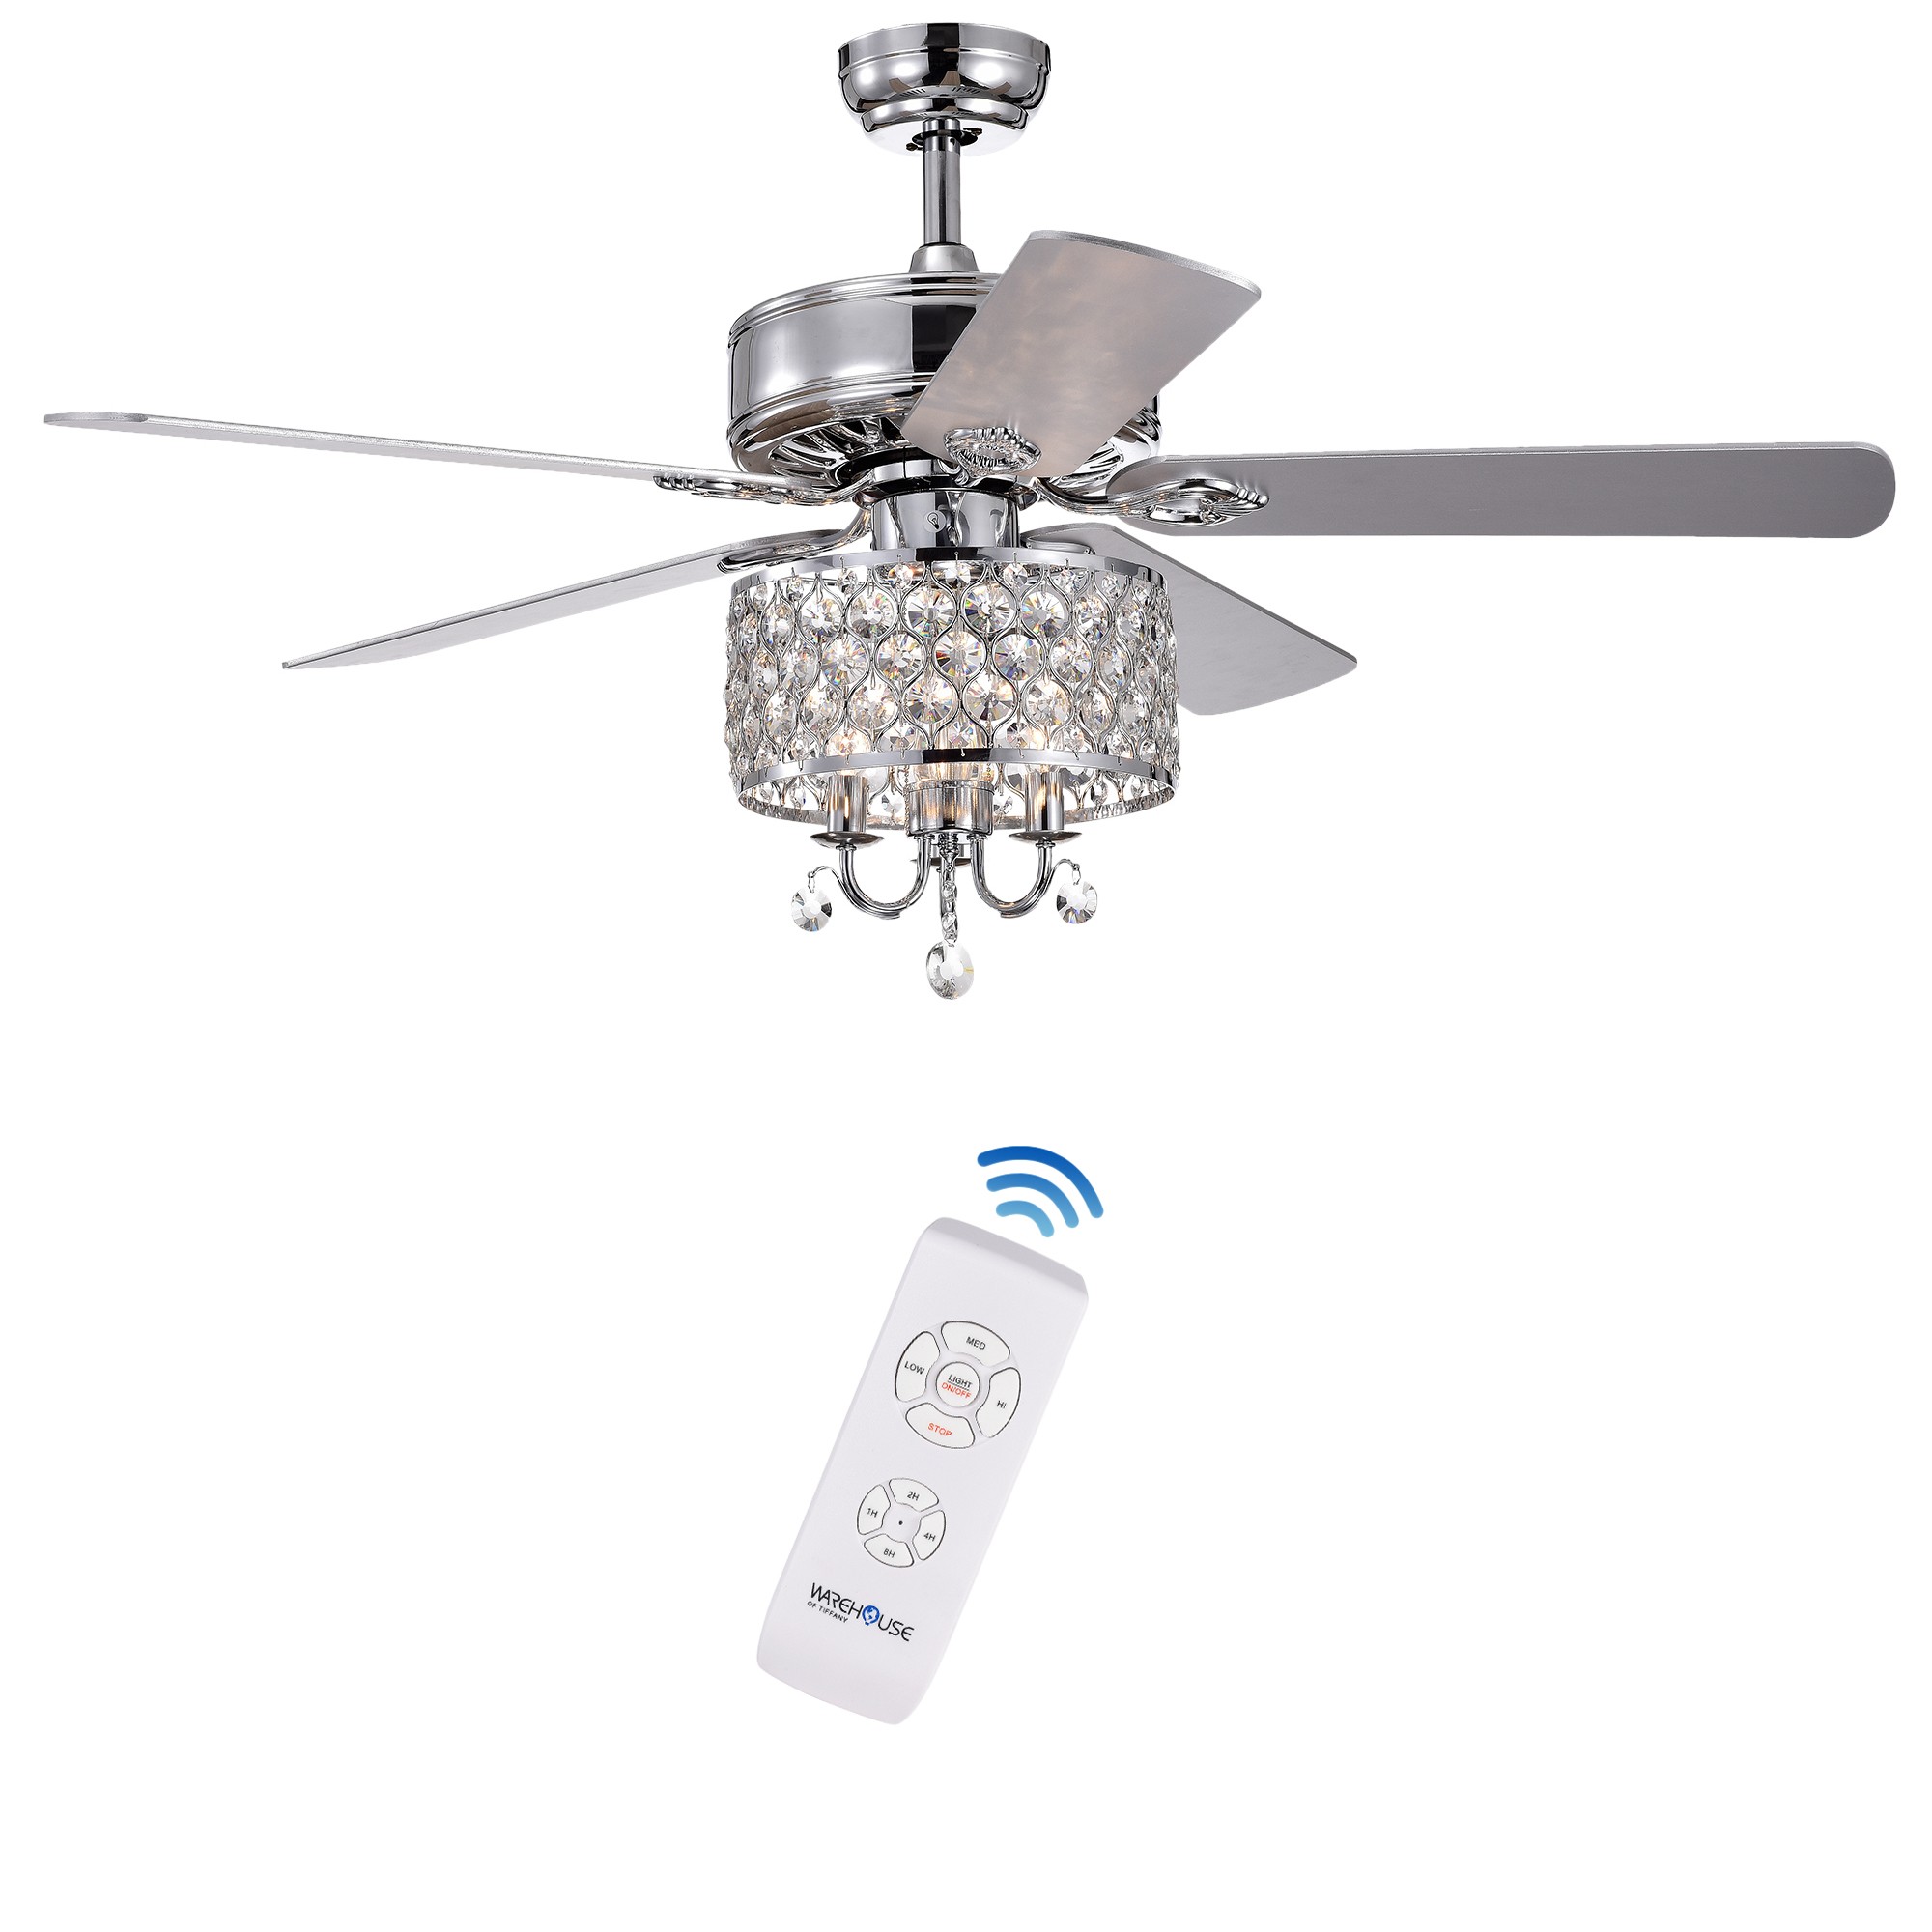 Fengren Chrome 3-light 52-inch Chrome Lighted Ceiling Fan with Crystal Shade (incl. Remote & 2 Color Option Blades)